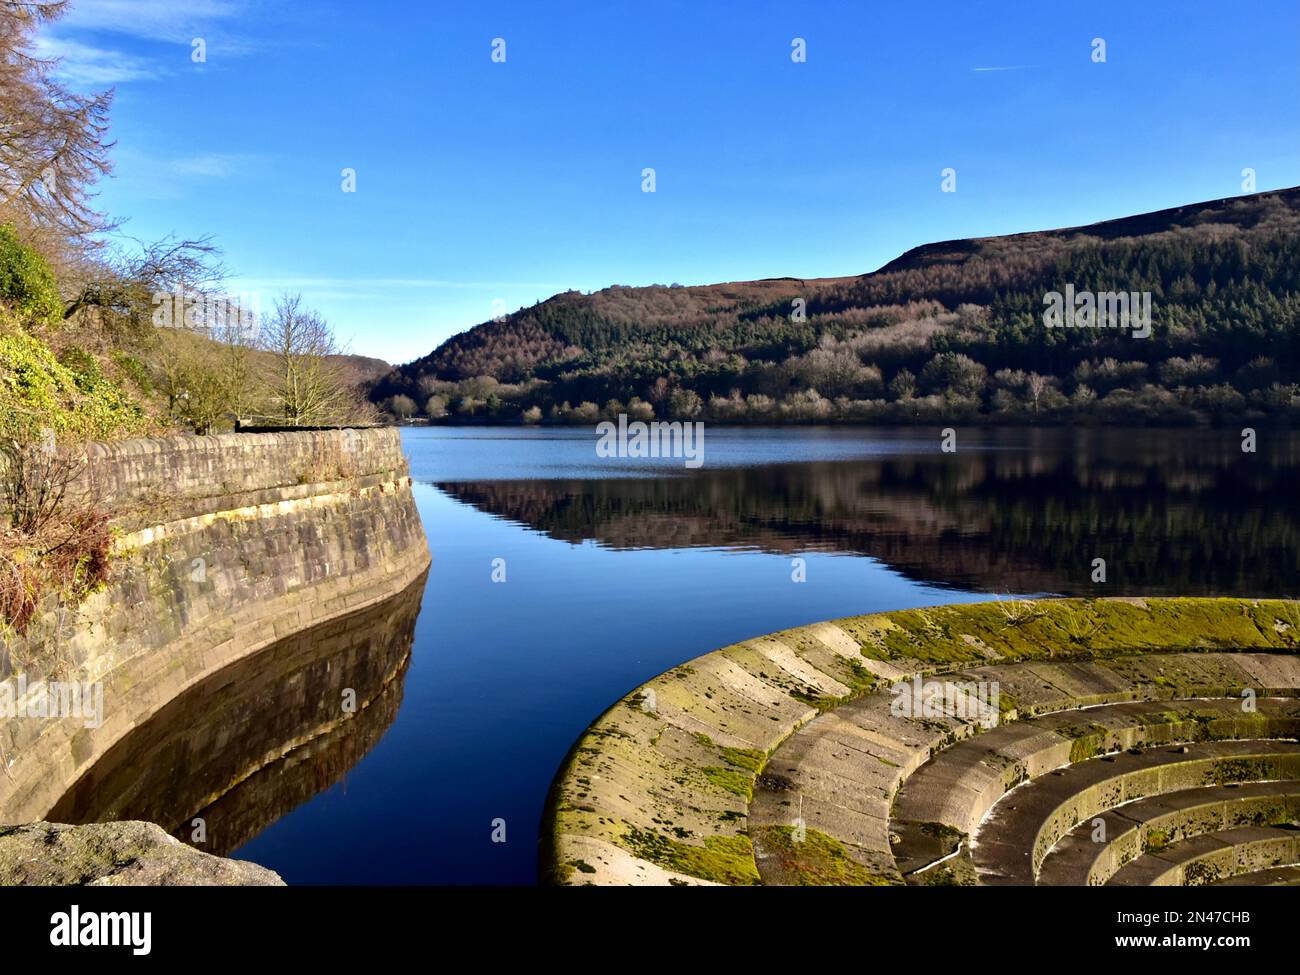 The Bellmouth Spillway and wall at Ladybower Reservoir. Stock Photo